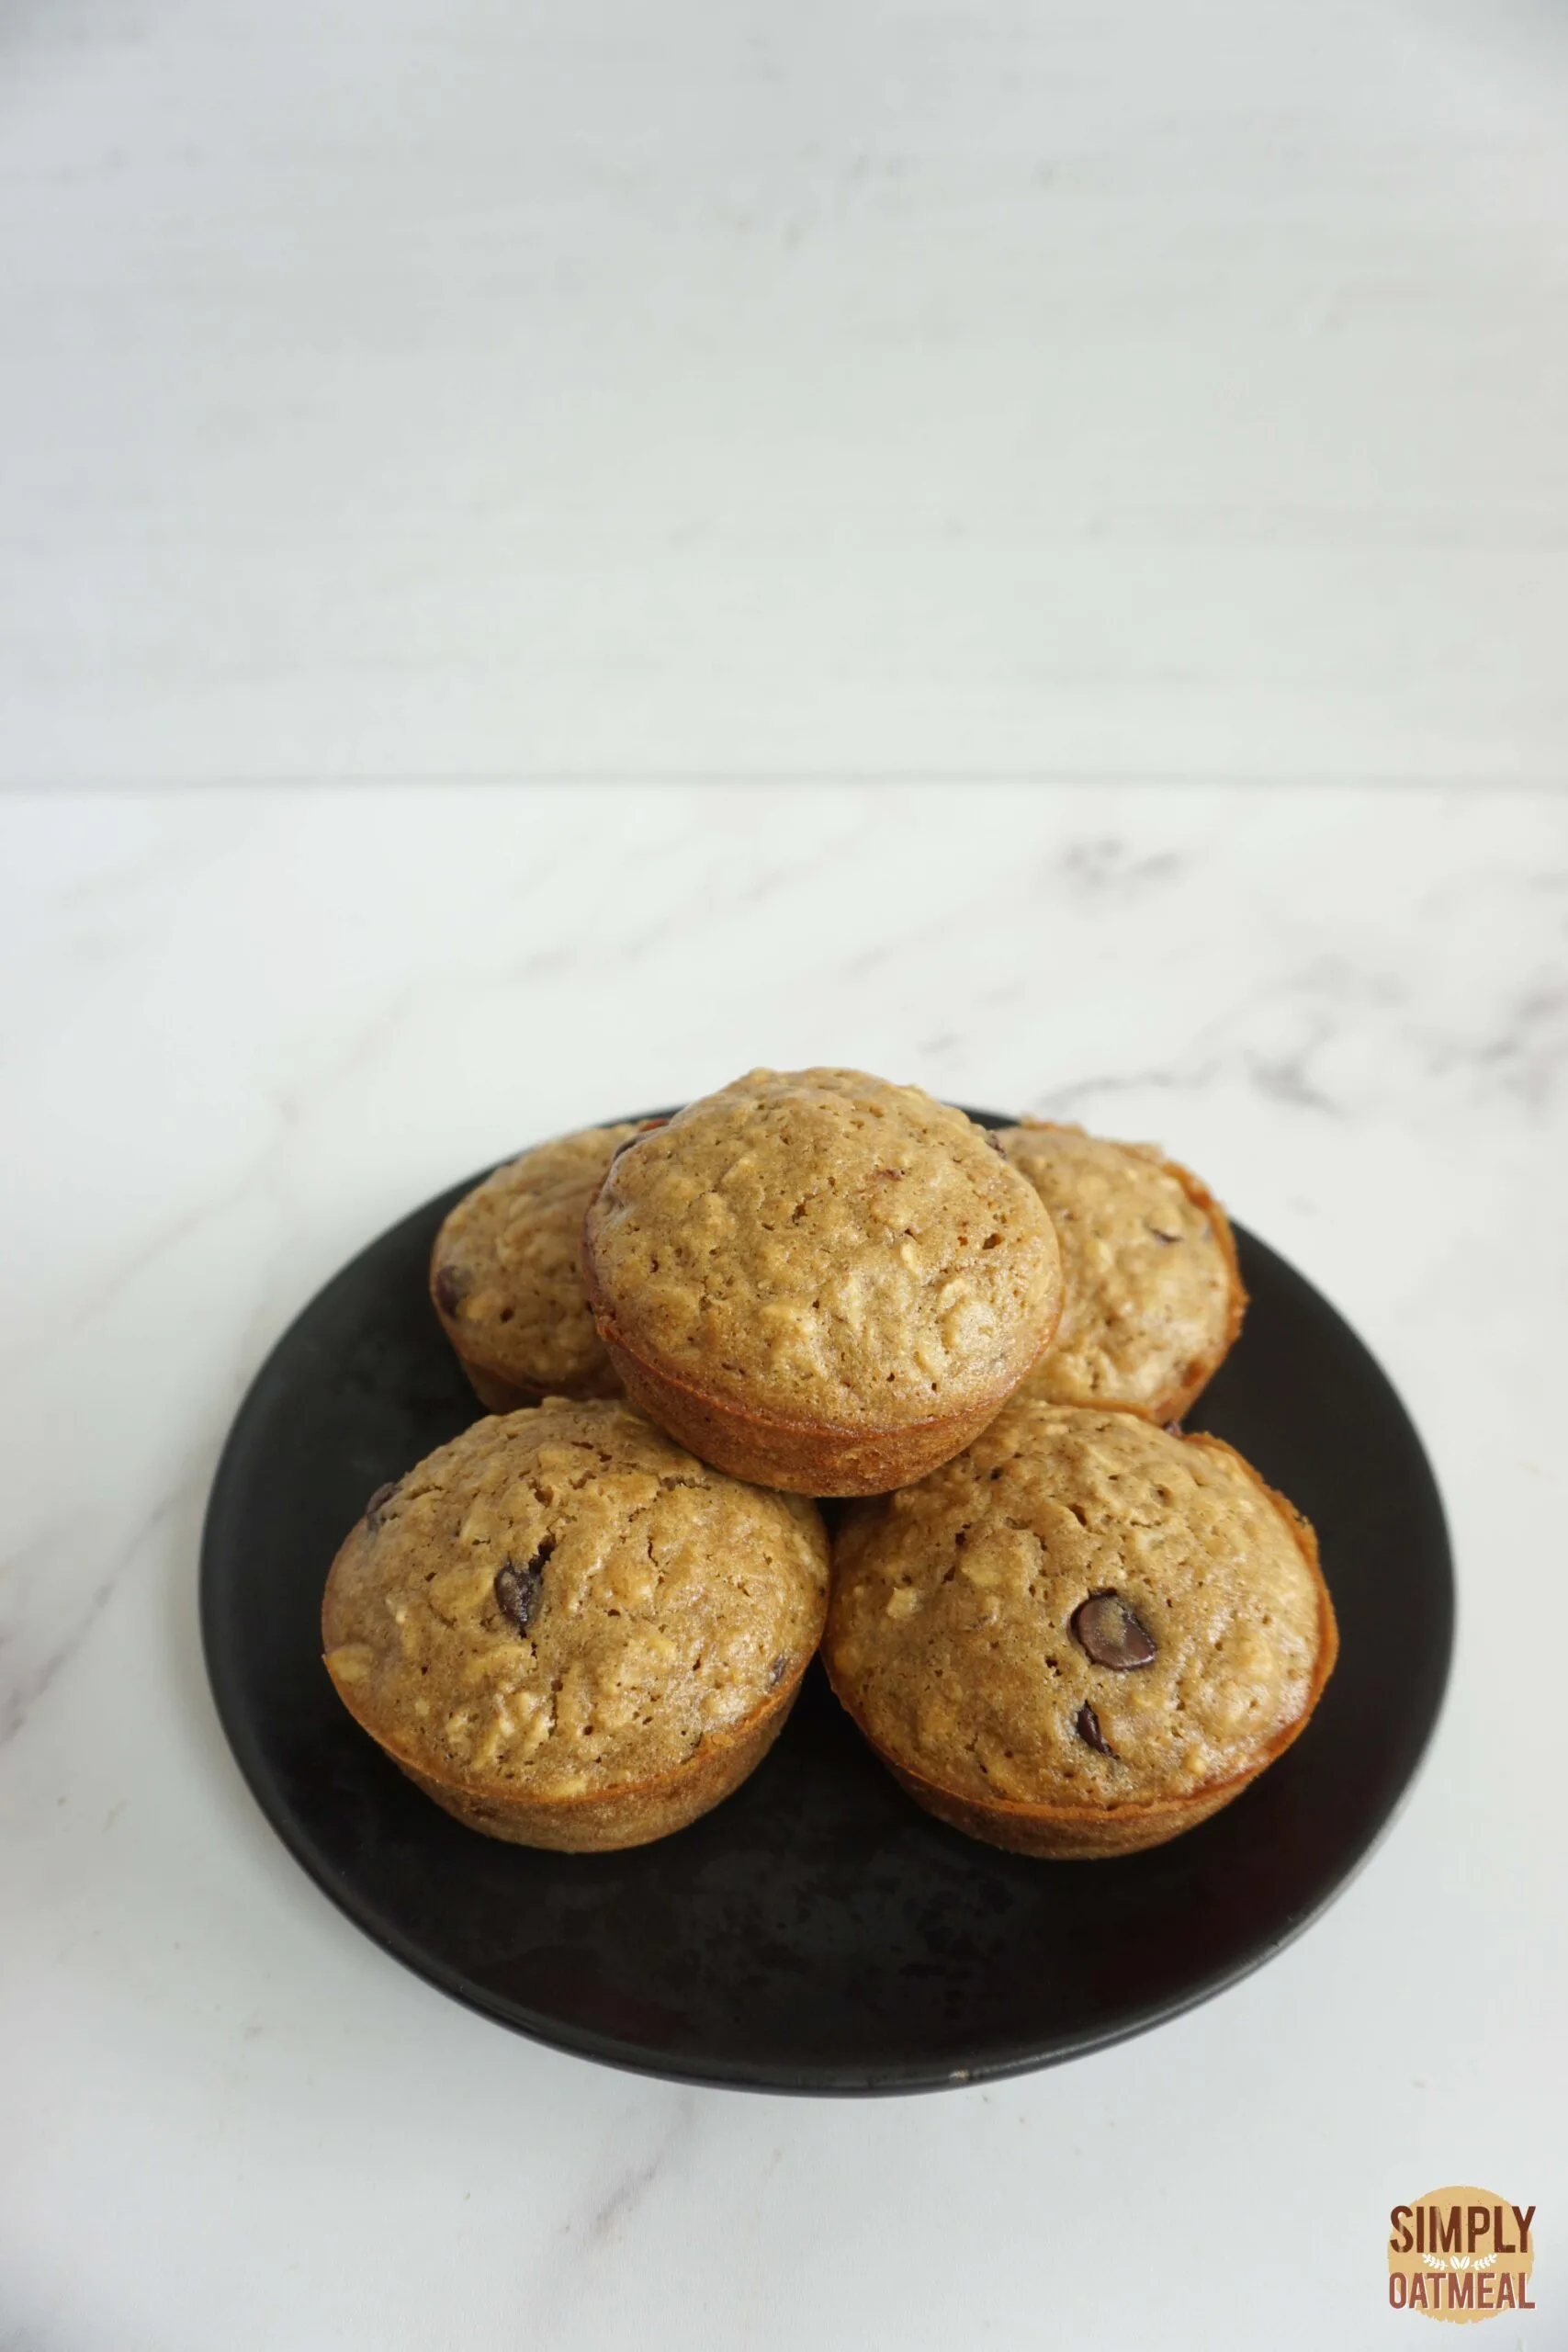 Fresh baked chocolate chip oatmeal muffins on a plate